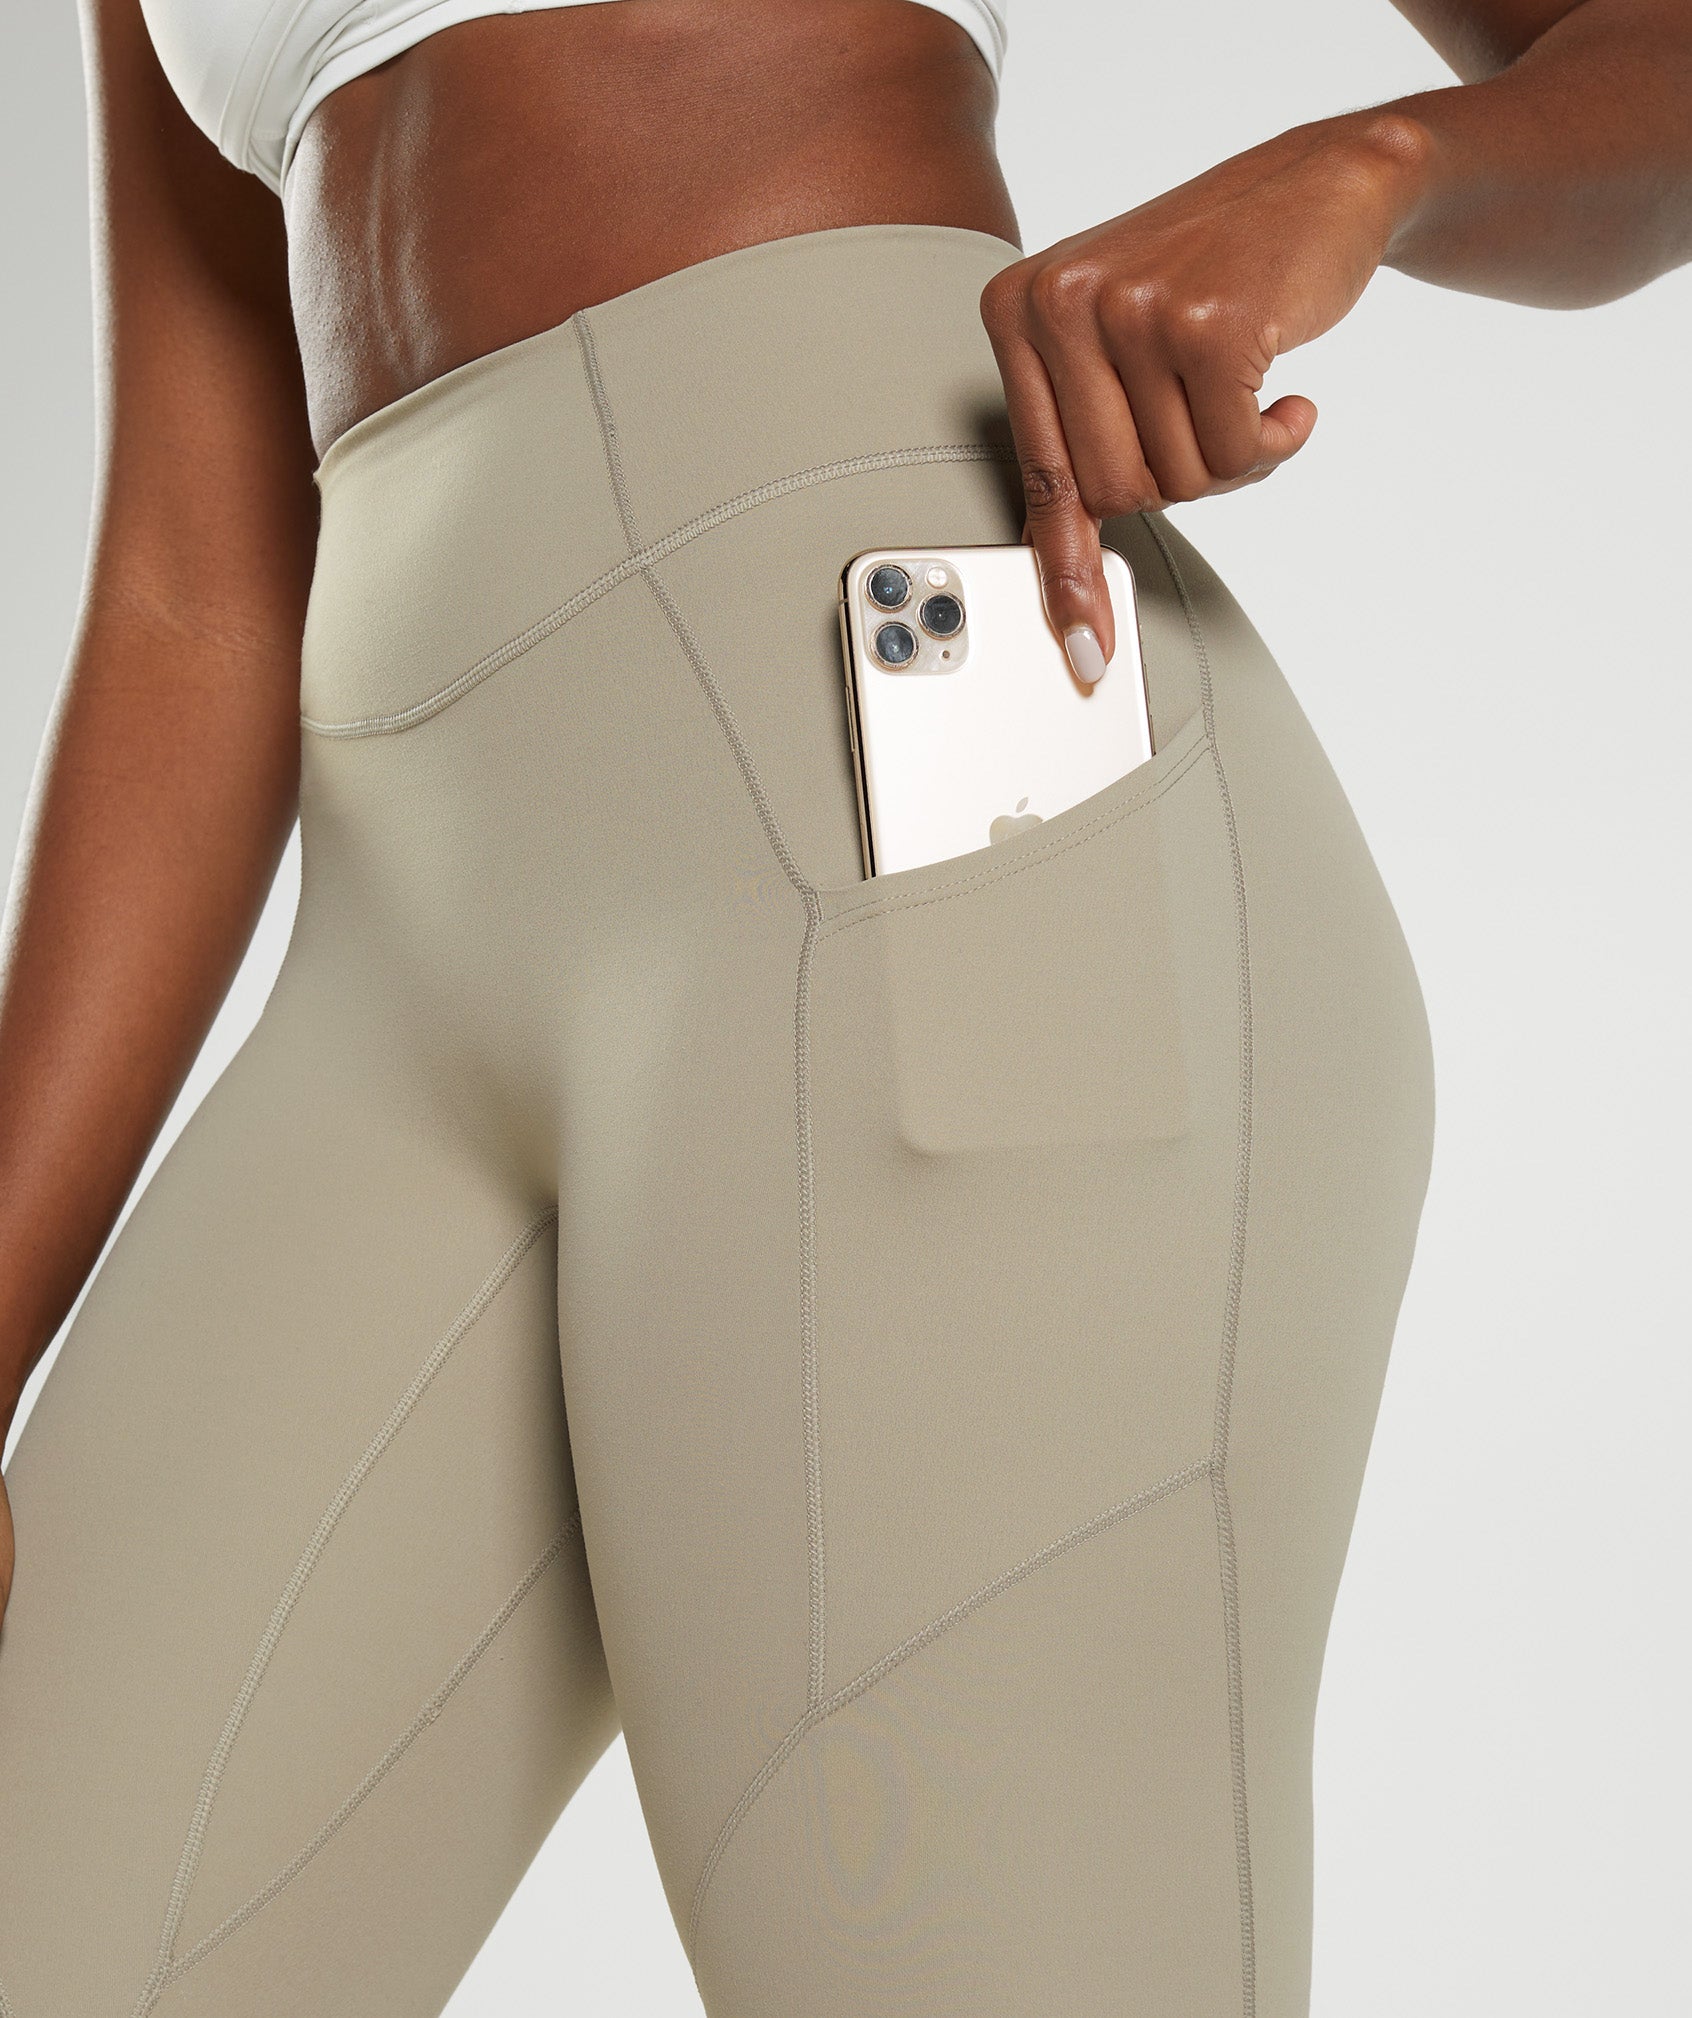 Whitney Everyday Pocket Leggings in Cement Brown